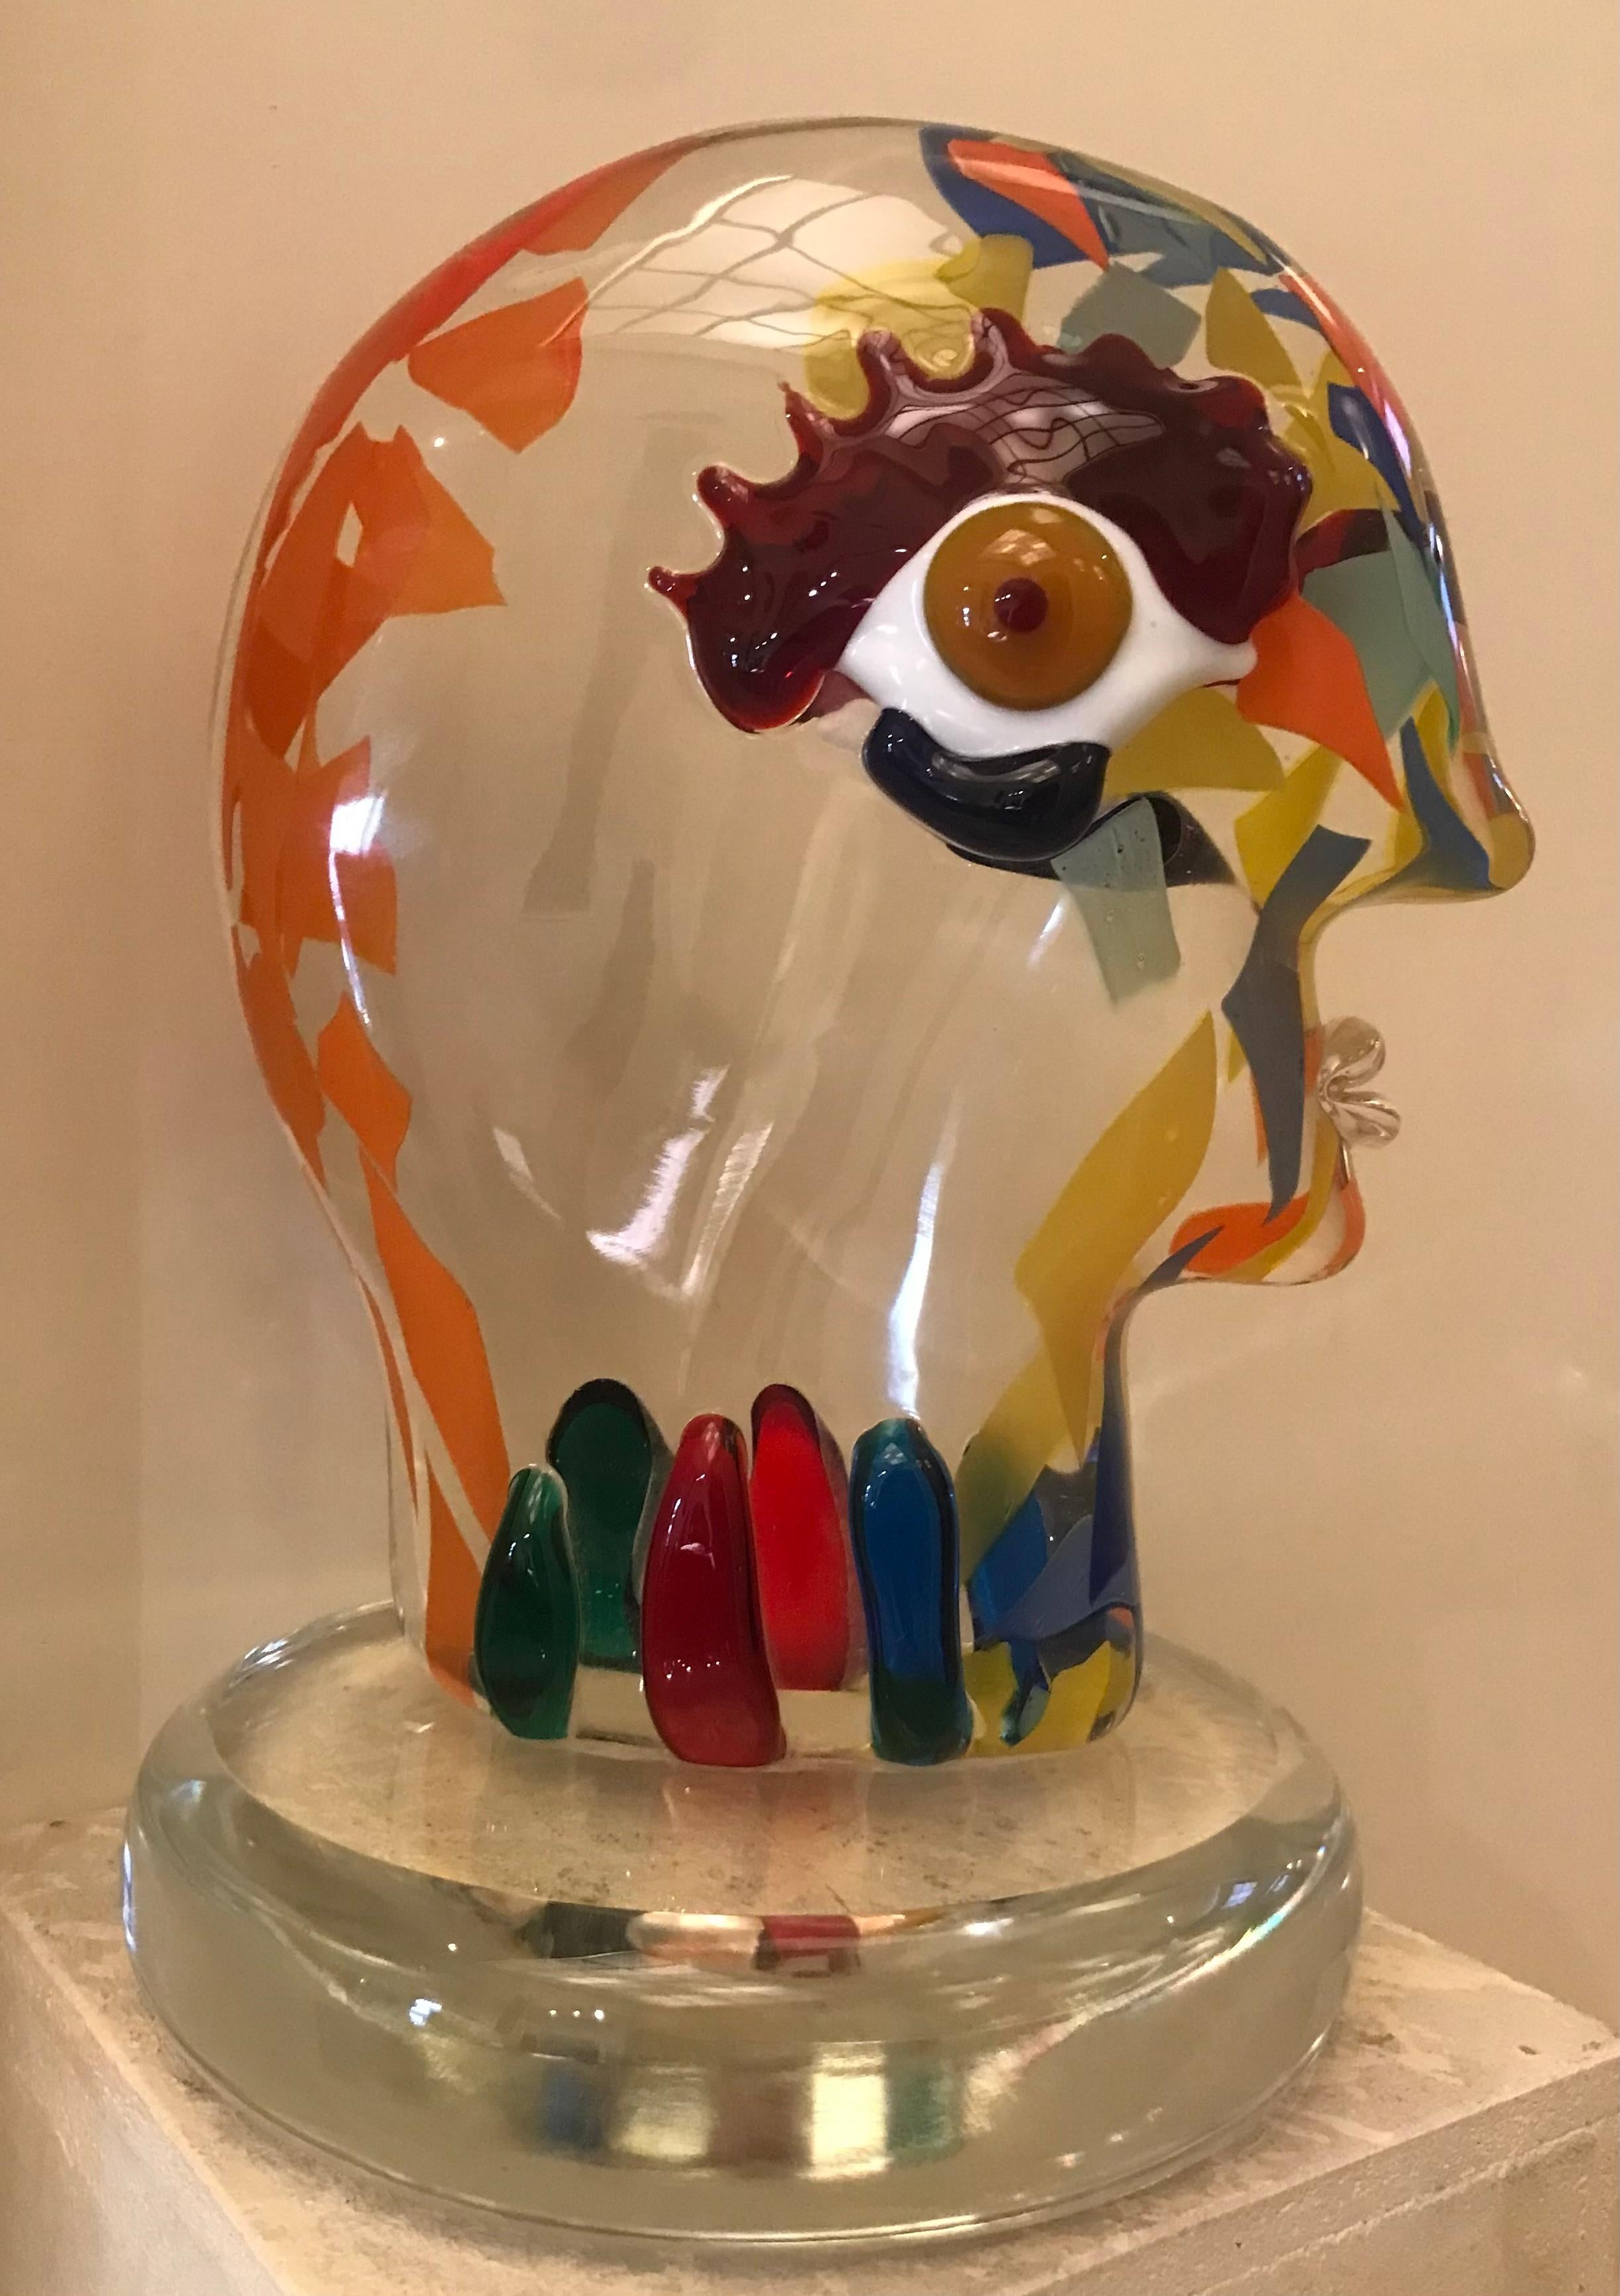 Impressive in shape and color, famous glassblowing family from Murano/Italy, with long tradition.
Giuliano Tosi, master glassblower, born 1942 family tradition of glassblowing since 1483 signed and dated: 1998, Murano/Venice, Italy